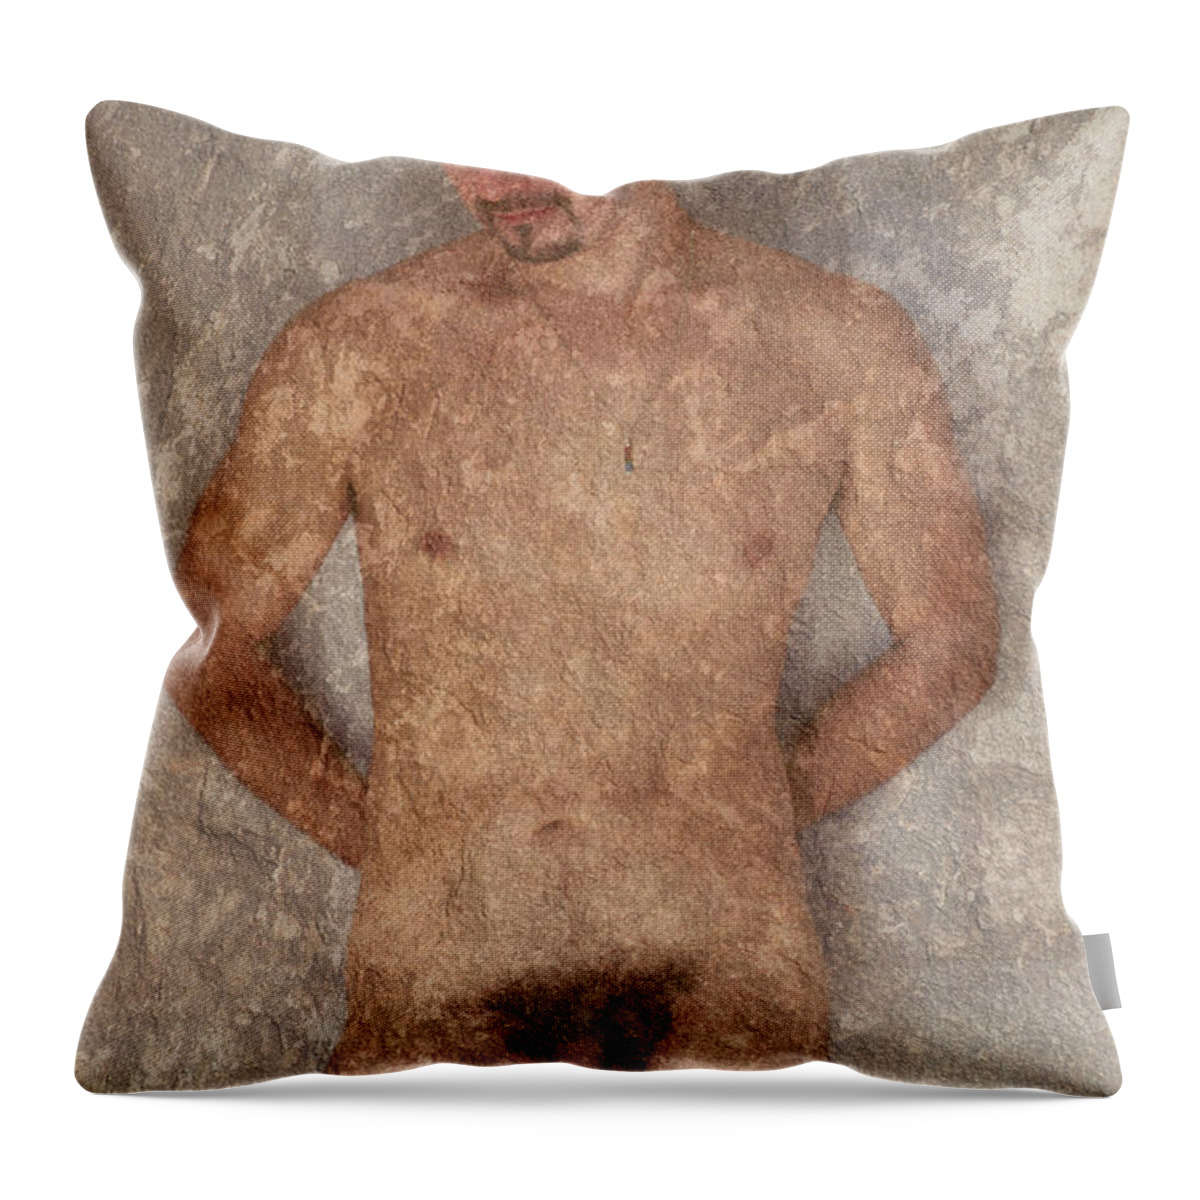 Male Throw Pillow featuring the photograph Rudy G. 2-1 by Andy Shomock